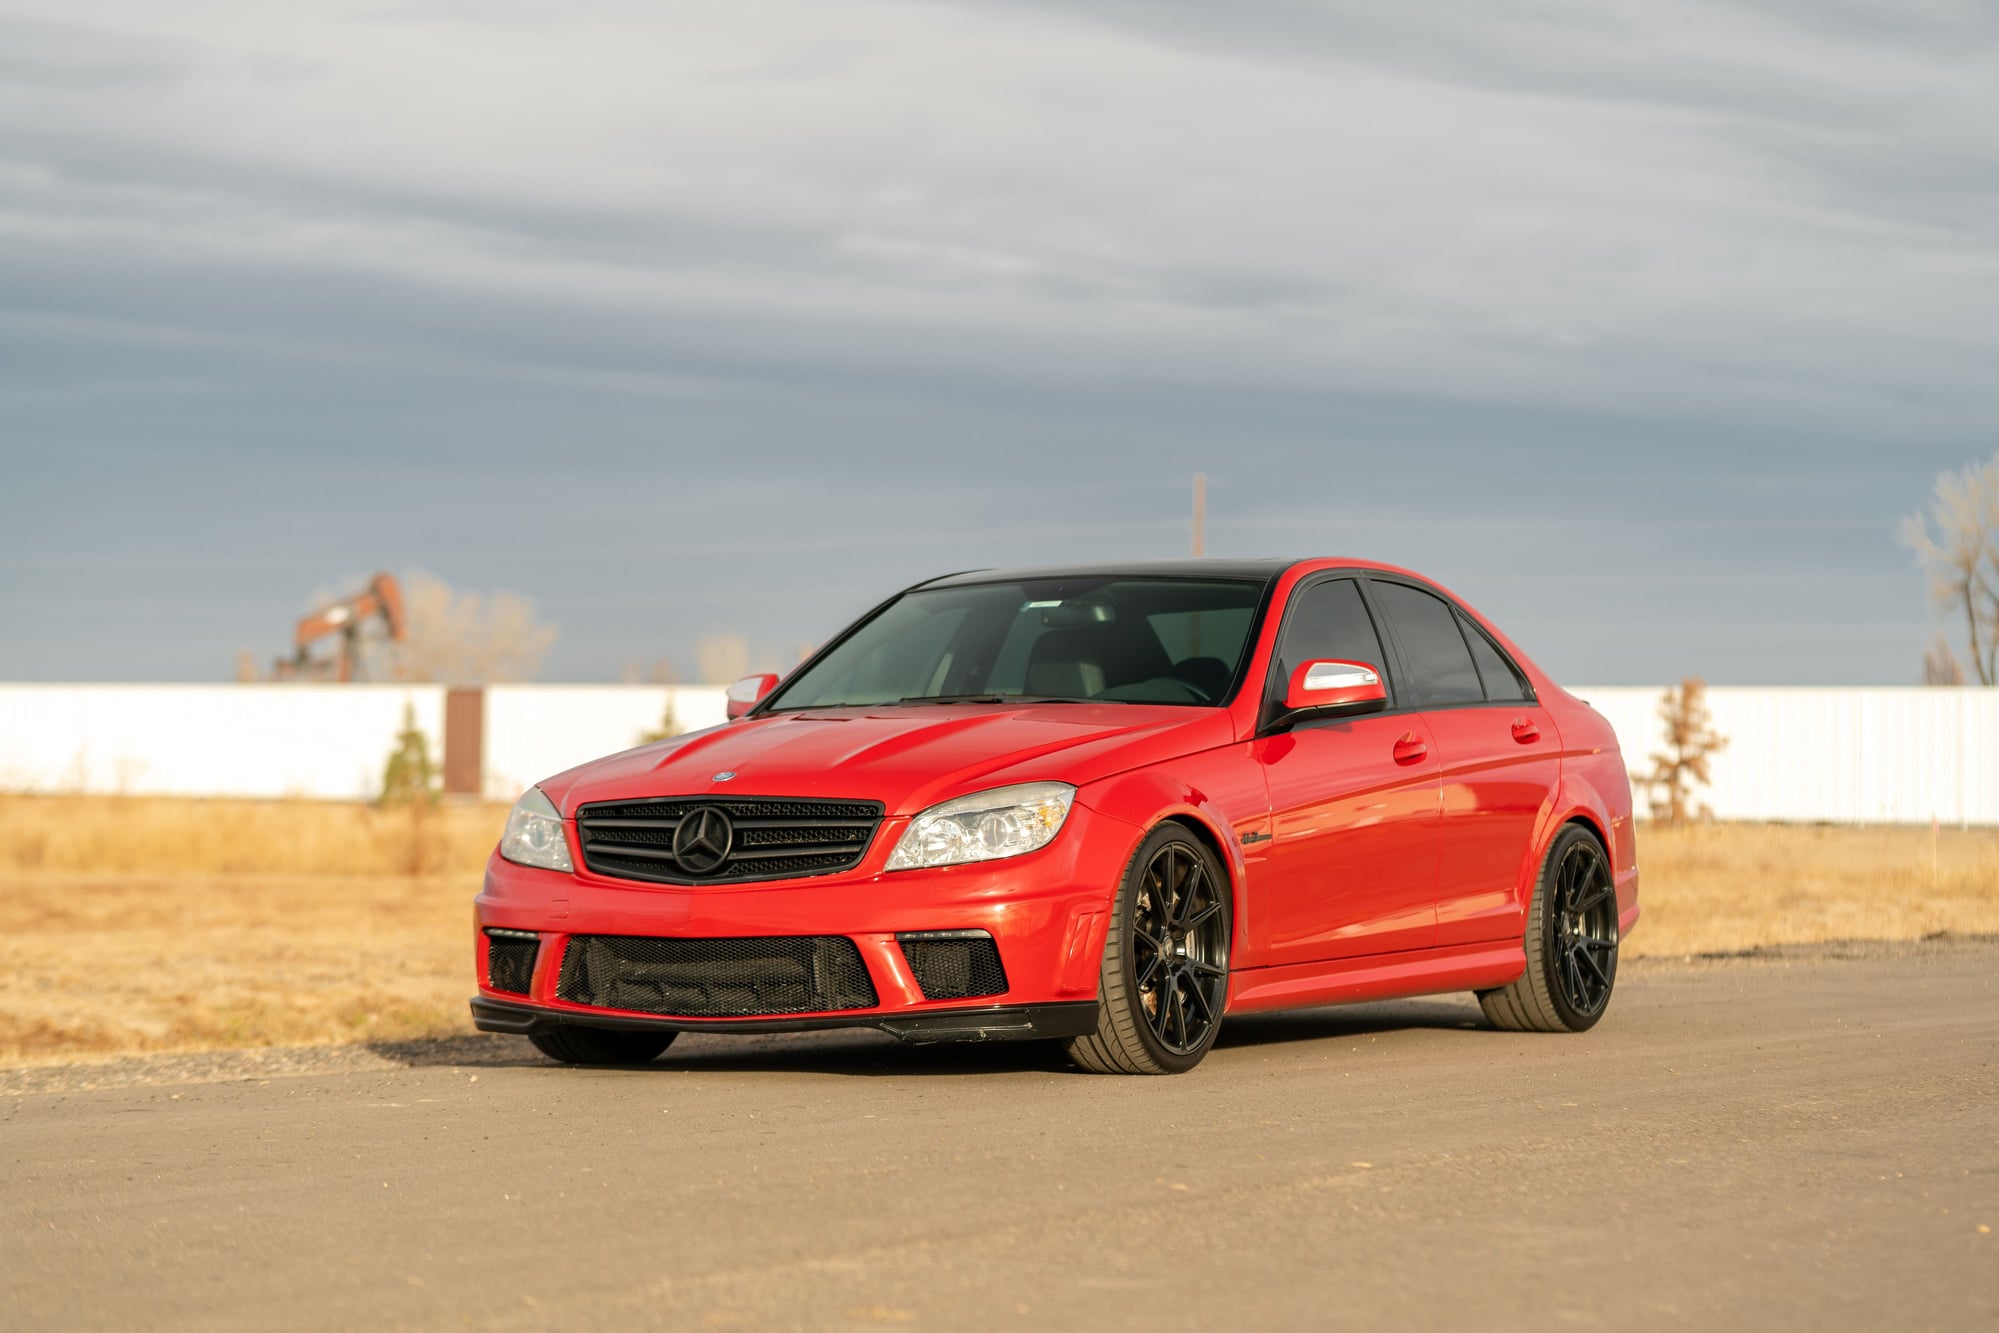 2009 Mercedes-Benz C63 AMG - Fire Opal Red 2009 Mercedes-Benz C63 AMG w/ P30 Package - Used - VIN WDDGF77X69F323106 - 88,700 Miles - 8 cyl - 2WD - Automatic - Sedan - Red - Frederick, CO 80530, United States